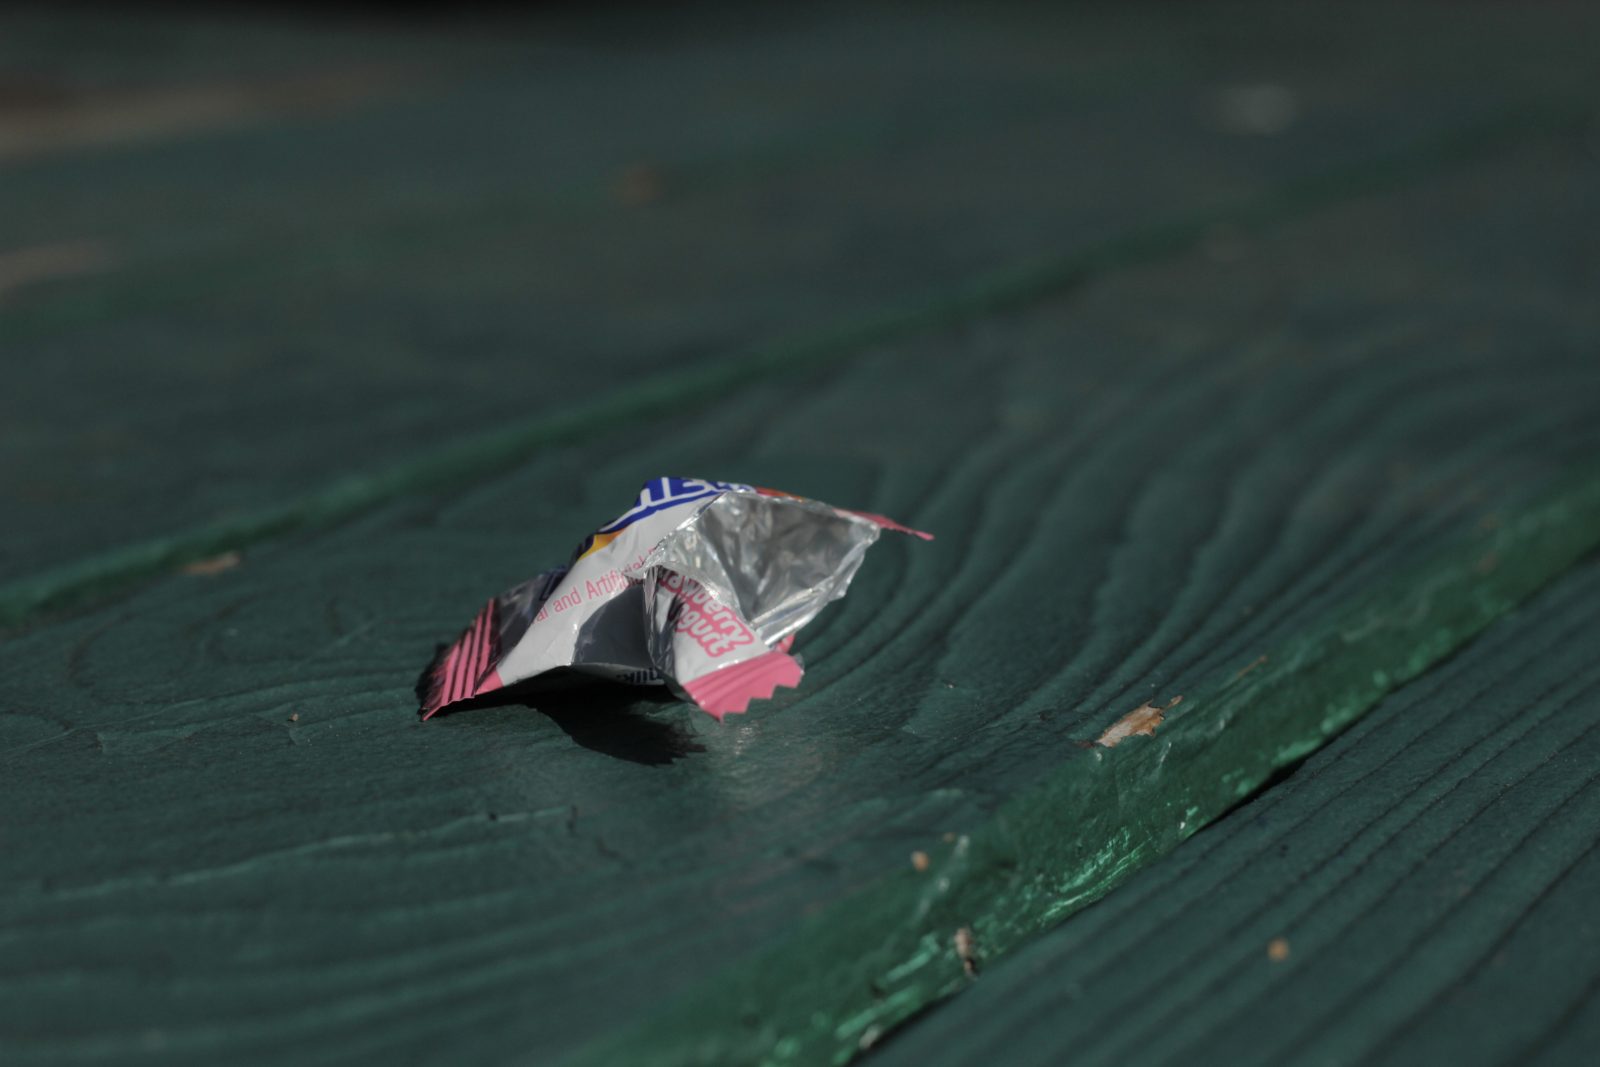 Photo of a crumpled candy wrapper in green background